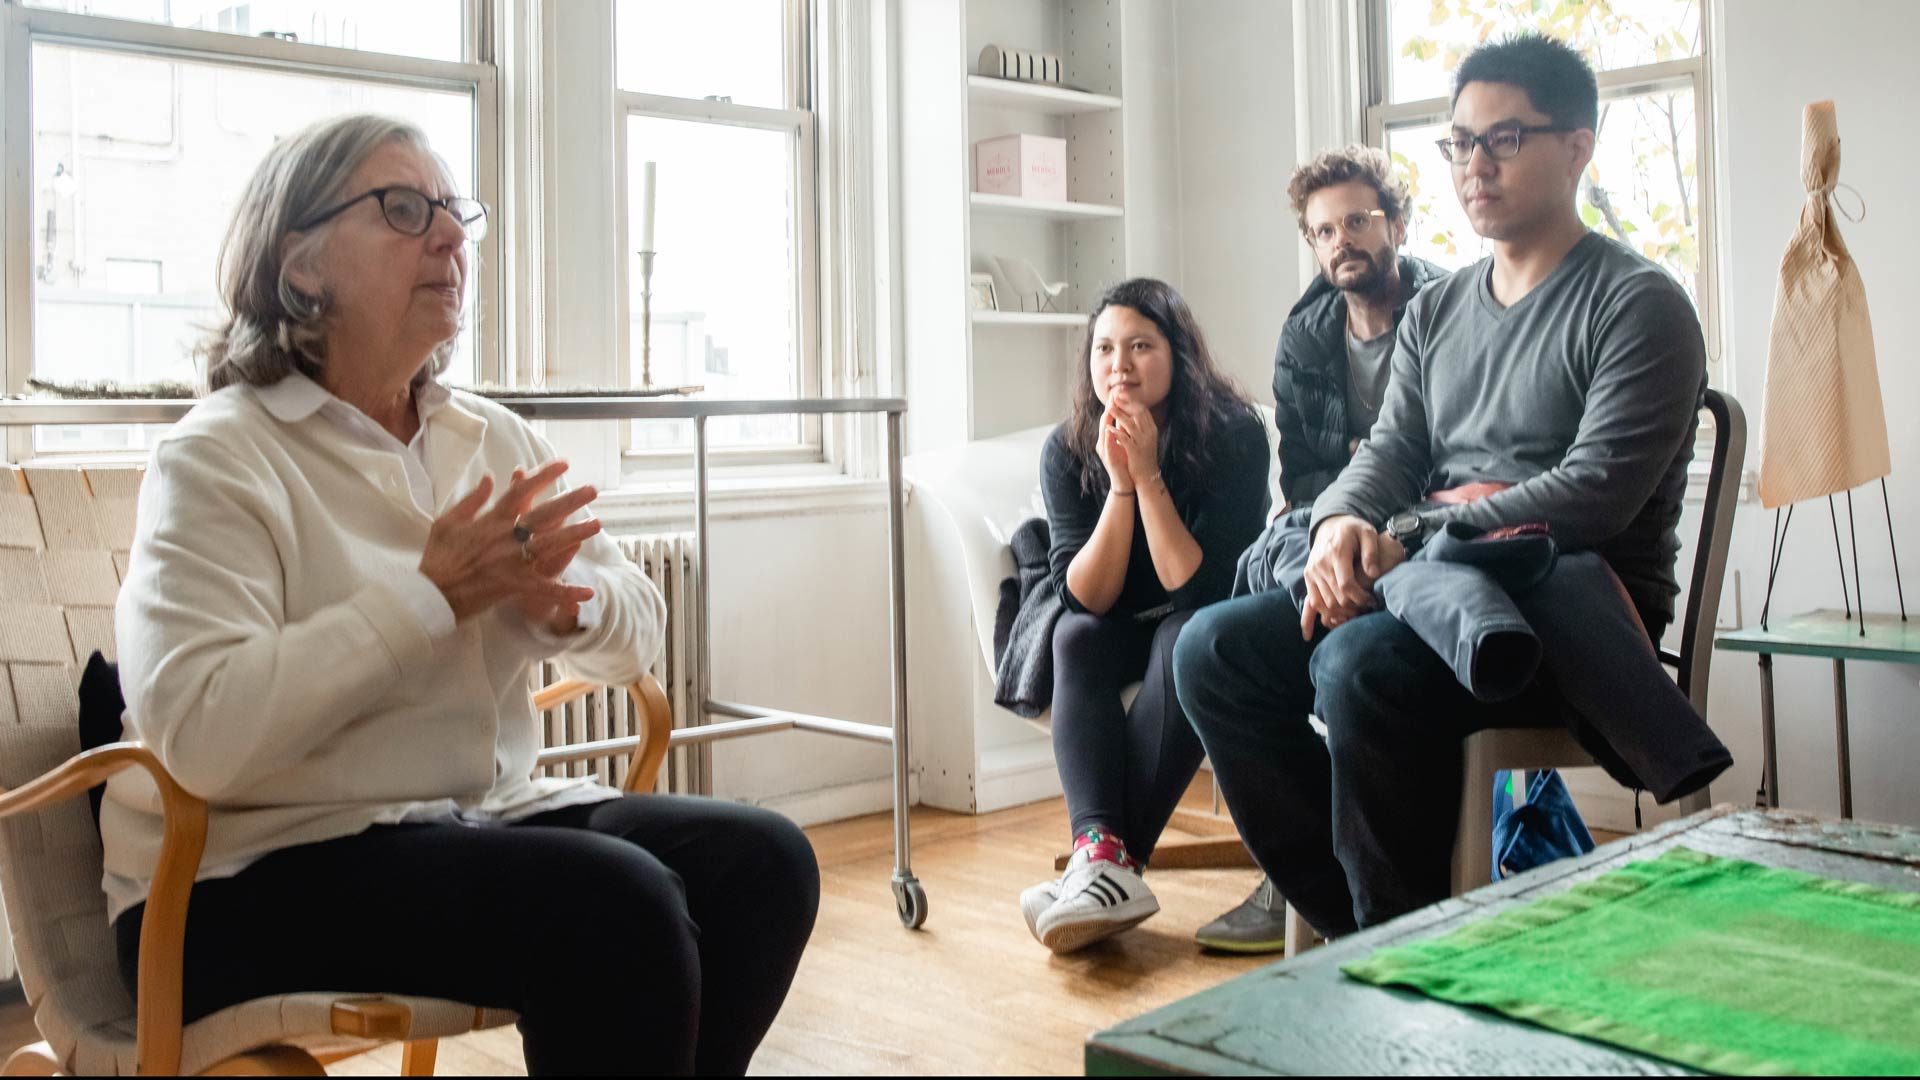 Maira Kalman in her apartment with students